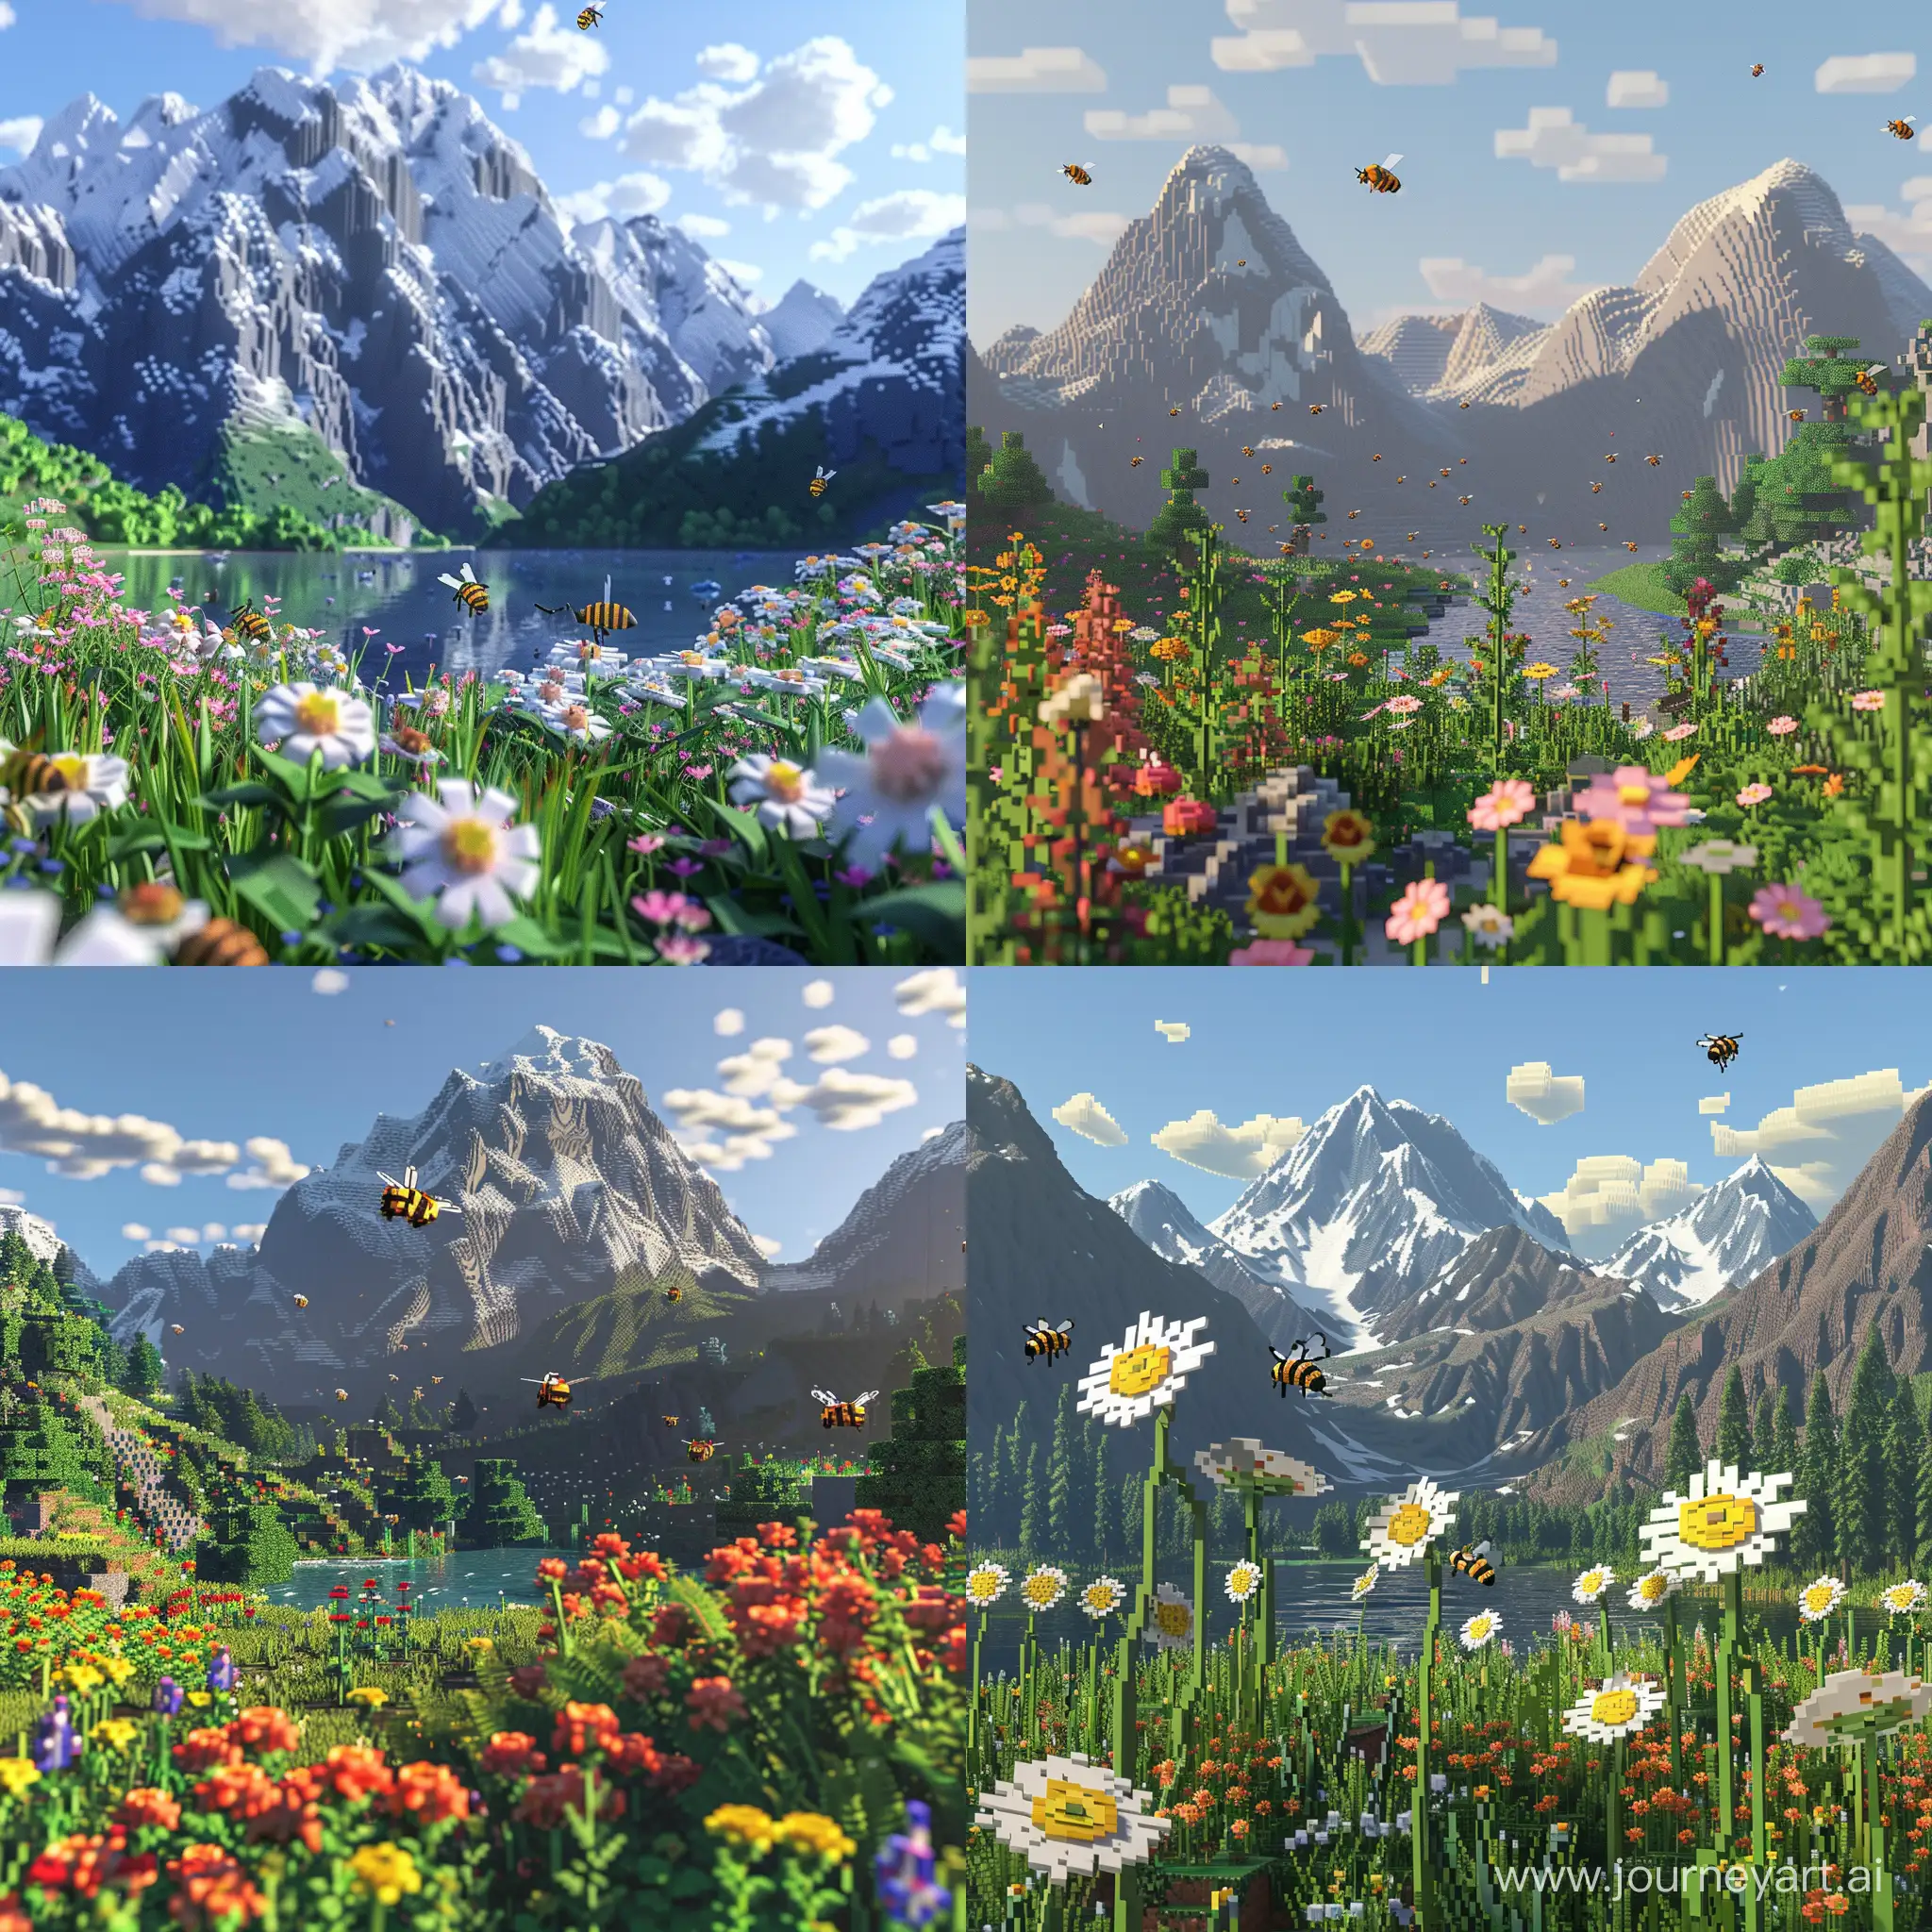 Minecraft-Style-Landscape-with-Realistic-Flowers-Bees-and-Mountains-by-a-Mountain-Lake